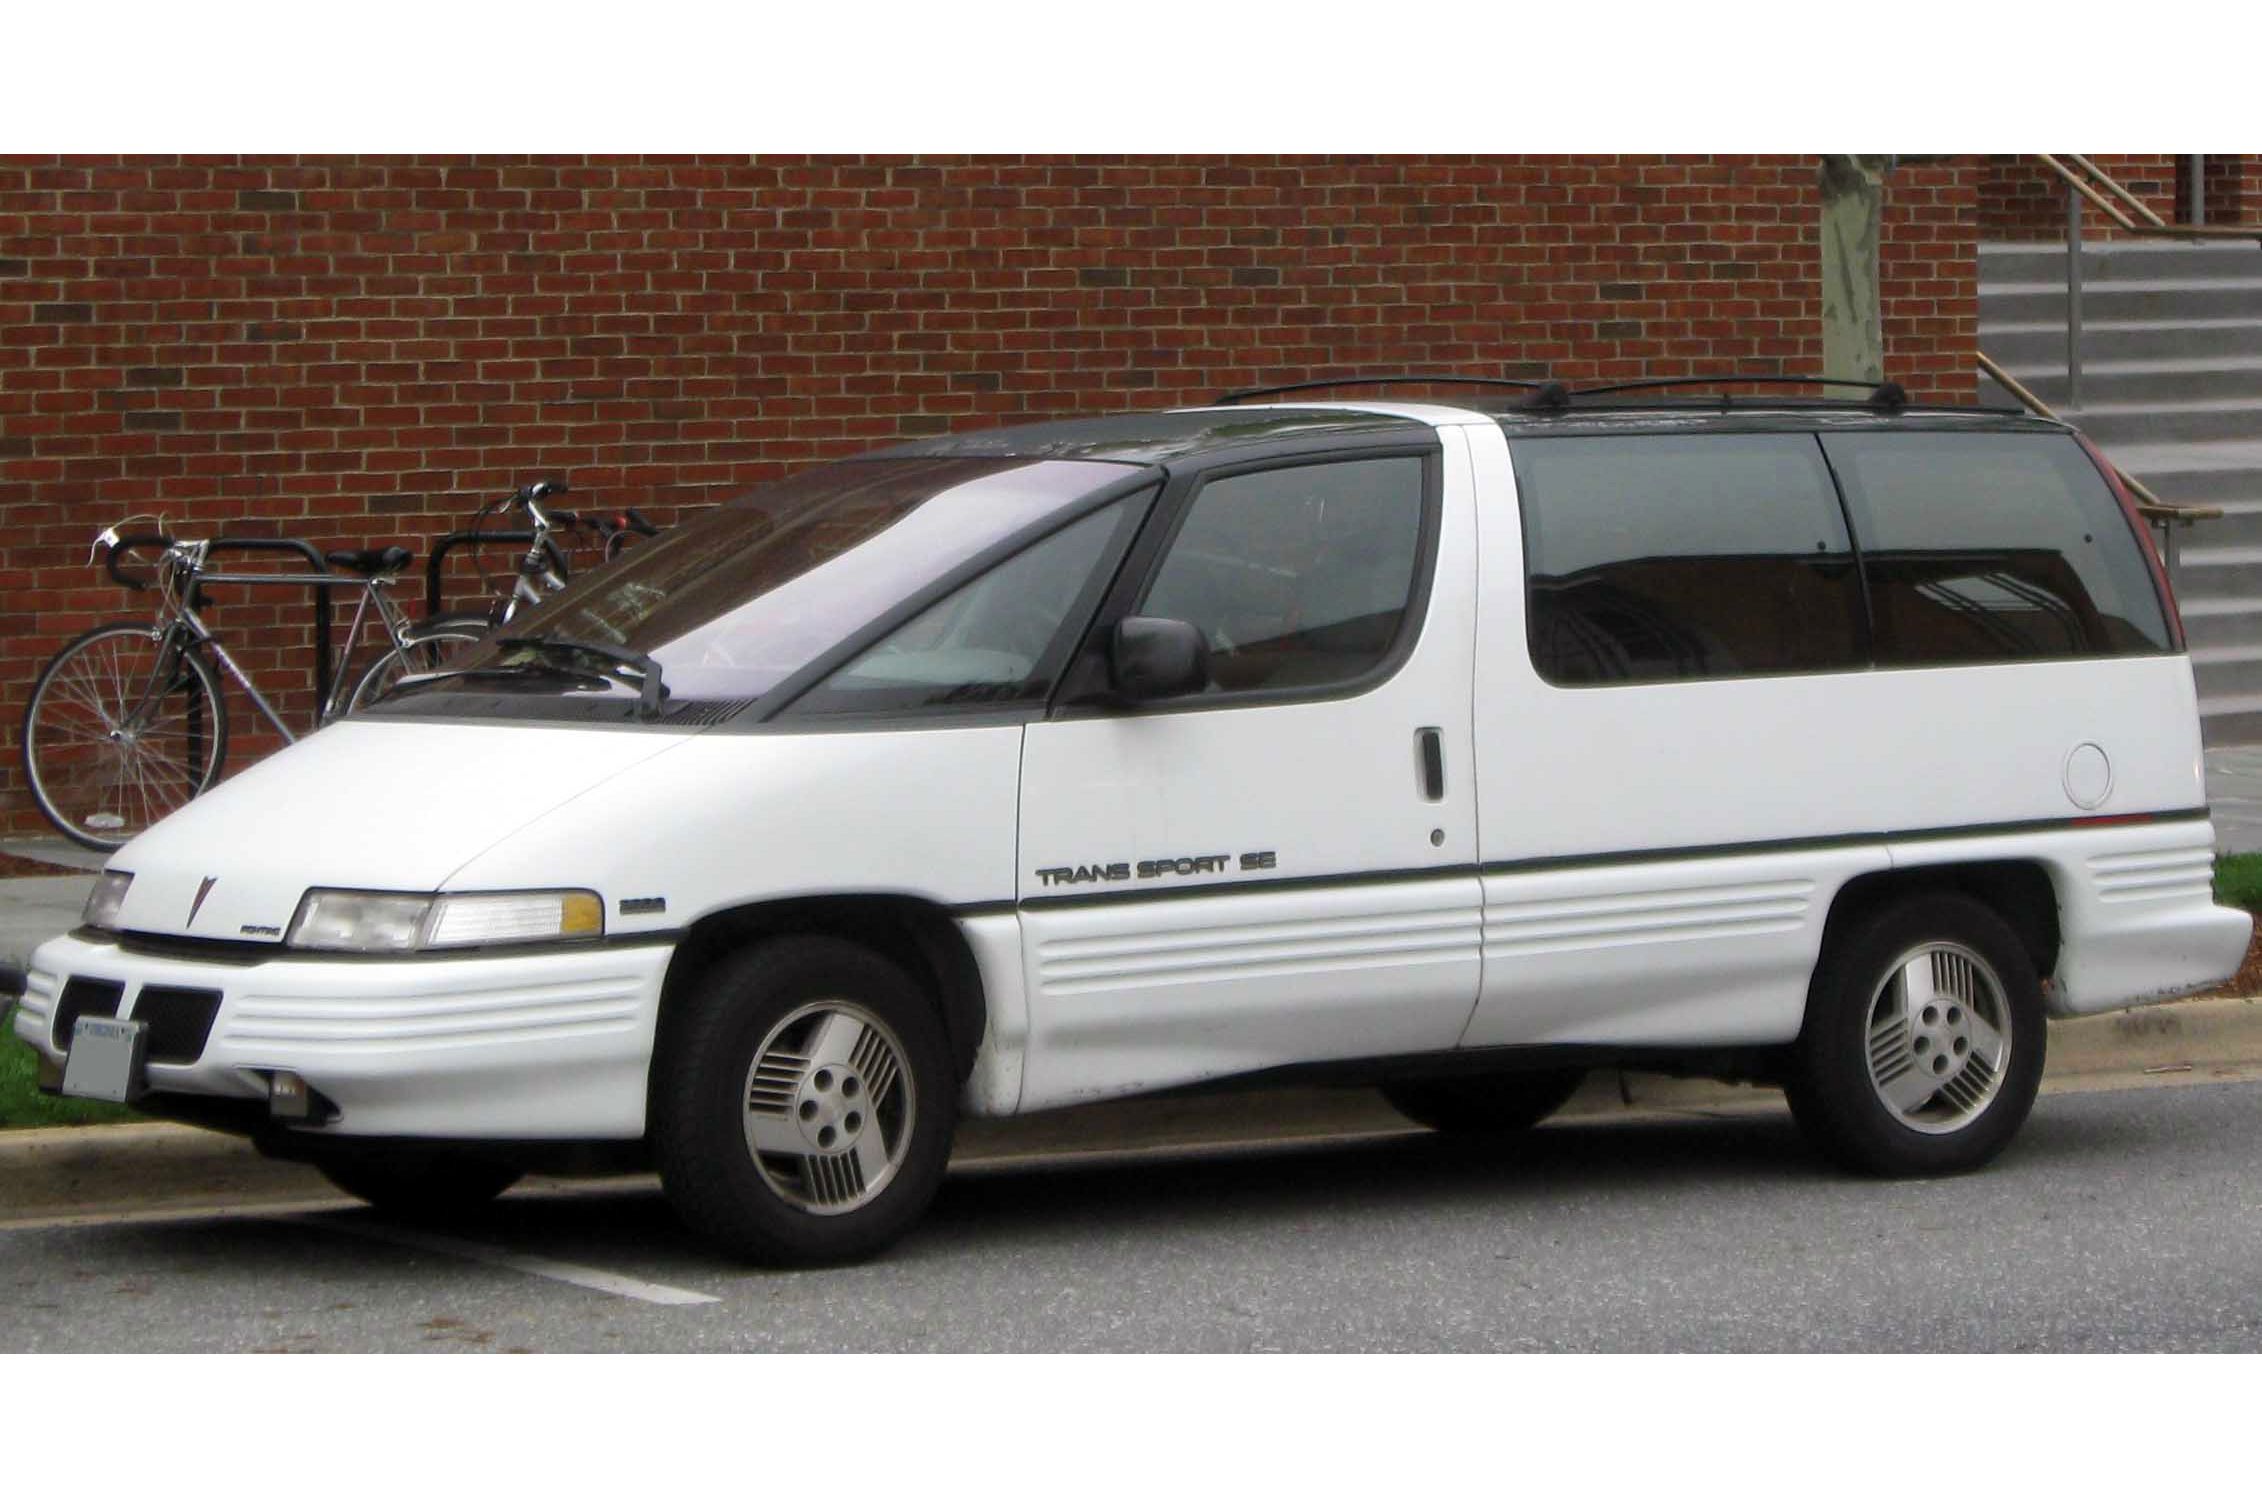 <p>The fundamental truth of minivans is that they aren't cool or easy on the eyes, and carmakers are probably better off embracing this fact than pretending otherwise. But poor Pontiac didn't get that memo before designing the oddly pointy Trans Sport, which the auto company described as the "<a href="https://jalopnik.com/5847867/1990-pontiac-trans-sport-was-the-space-vehicle-of-the-90s">space vehicle of the 90s</a>." (We suppose that does sound better than "Dust Buster on wheels.") Starting in the year 1997, Pontiac dropped the futuristic styling in favor of a more traditional look.</p>